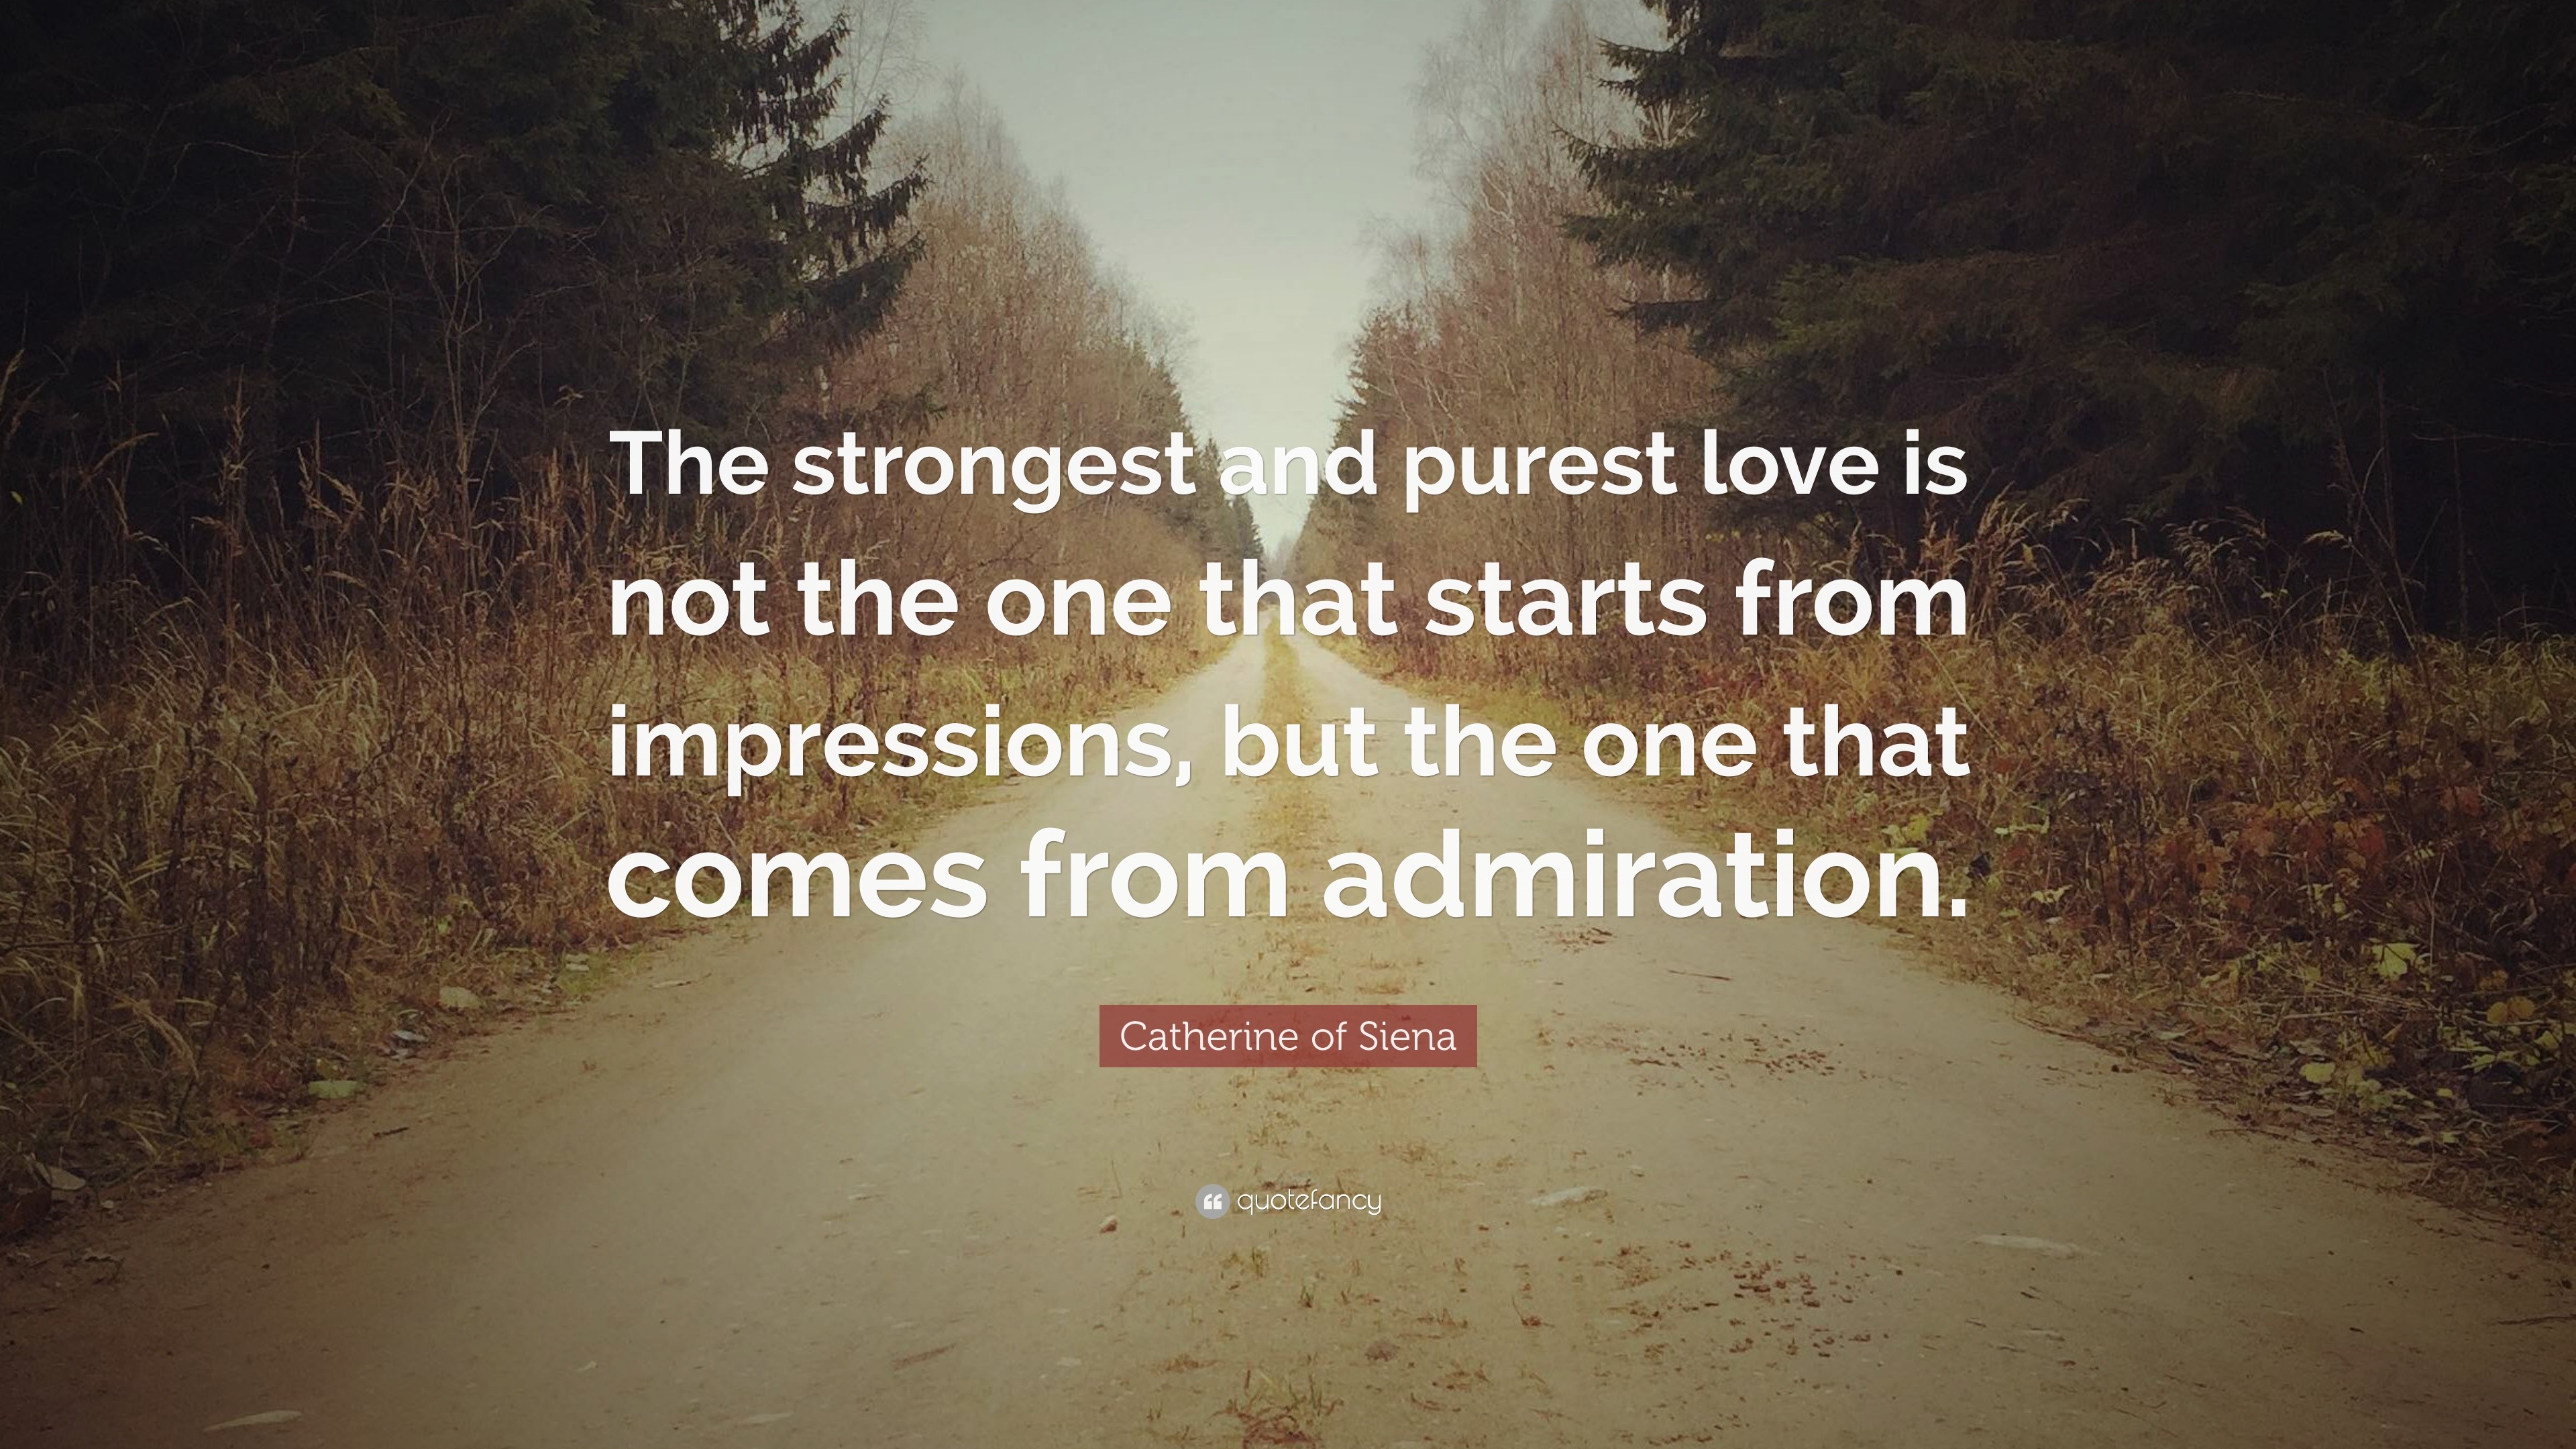 Catherine of Siena Quote: “The strongest and purest love is not